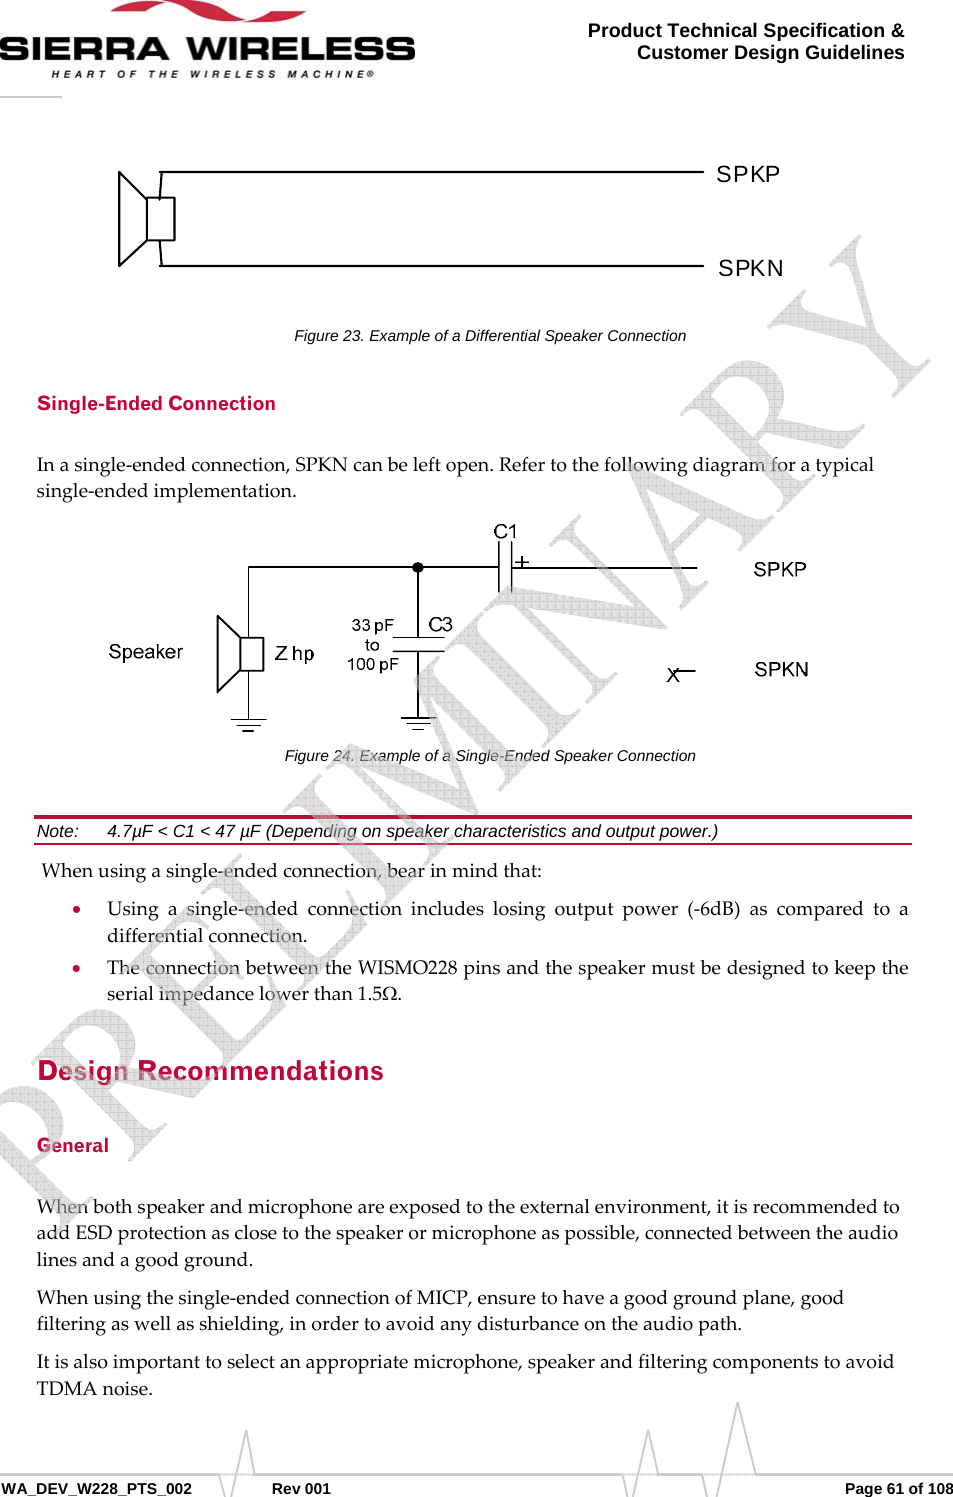      WA_DEV_W228_PTS_002 Rev 001  Page 61 of 108 Product Technical Specification &amp; Customer Design Guidelines  SPKP SPKN Figure 23. Example of a Differential Speaker Connection Single-Ended Connection Inasingle‐endedconnection,SPKNcanbeleftopen.Refertothefollowingdiagramforatypicalsingle‐endedimplementation.Figure 24. Example of a Single-Ended Speaker Connection Note:   4.7µF &lt; C1 &lt; 47 µF (Depending on speaker characteristics and output power.) Whenusingasingle‐endedconnection,bearinmindthat:• Usingasingle‐endedconnectionincludeslosingoutputpower(‐6dB)ascomparedtoadifferentialconnection.• TheconnectionbetweentheWISMO228pinsandthespeakermustbedesignedtokeeptheserialimpedancelowerthan1.5Ω.Design Recommendations General Whenbothspeakerandmicrophoneareexposedtotheexternalenvironment,itisrecommendedtoaddESDprotectionasclosetothespeakerormicrophoneaspossible,connectedbetweentheaudiolinesandagoodground.Whenusingthesingle‐endedconnectionofMICP,ensuretohaveagoodgroundplane,goodfilteringaswellasshielding,inordertoavoidanydisturbanceontheaudiopath.Itisalsoimportanttoselectanappropriatemicrophone,speakerandfilteringcomponentstoavoidTDMAnoise.   